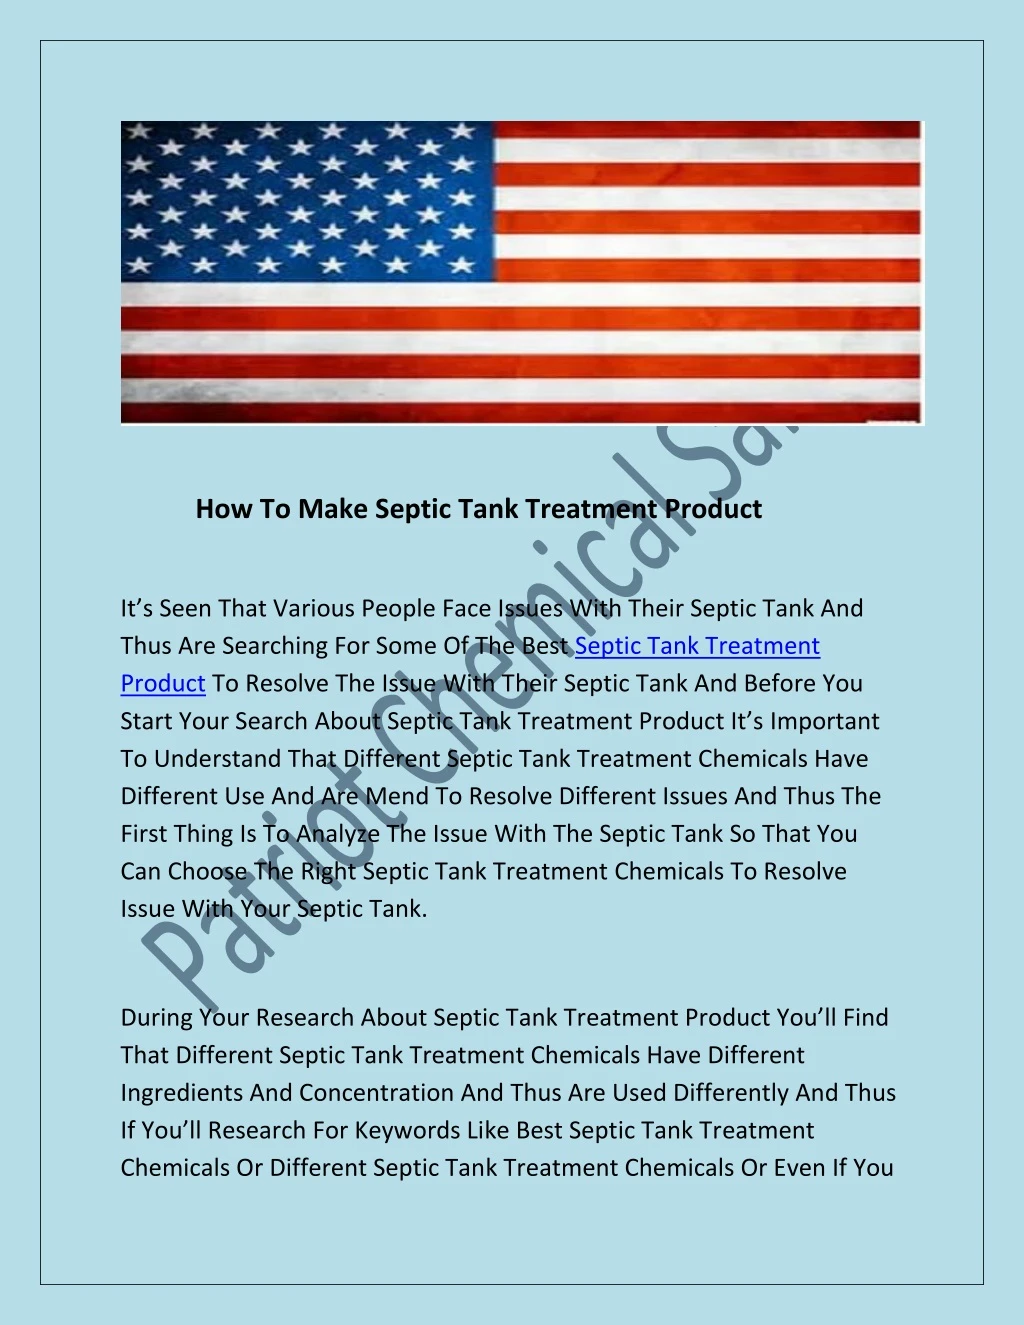 how to make septic tank treatment product